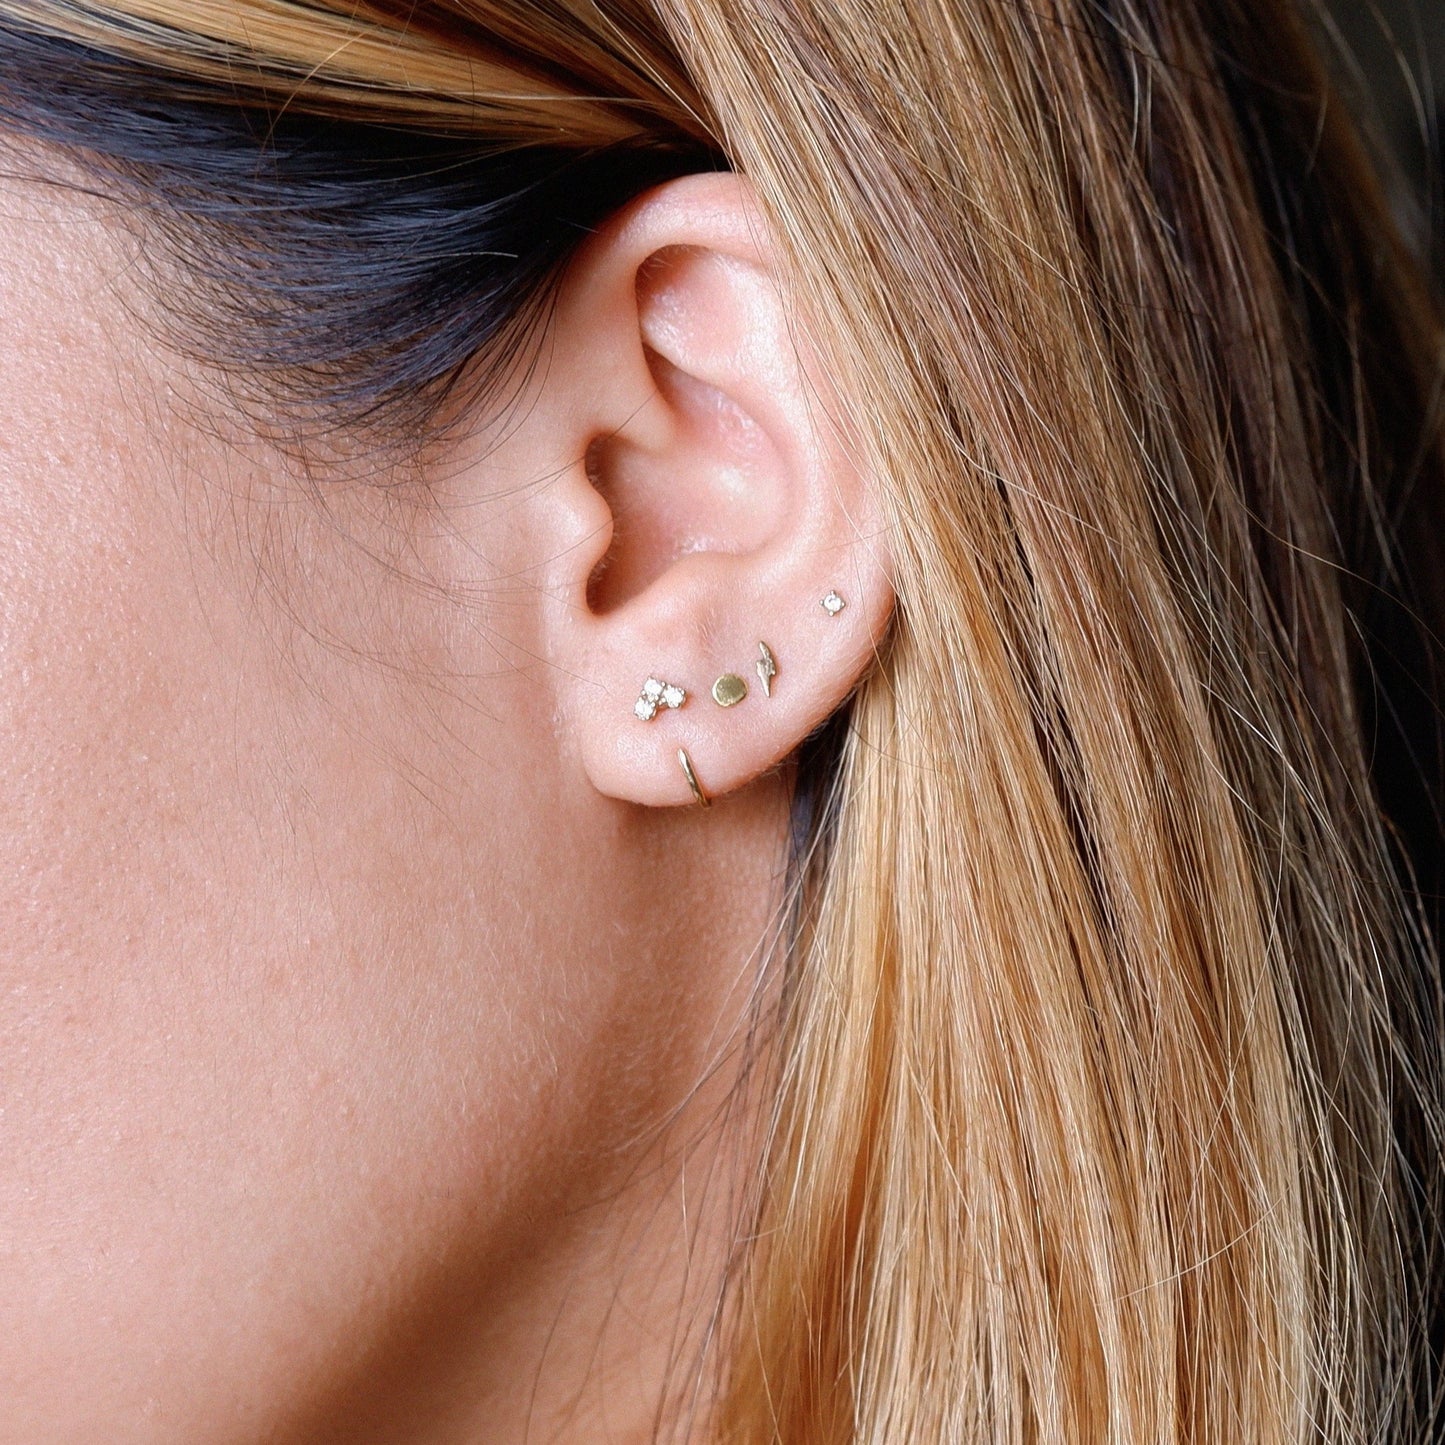 The Disc Easy Studs in Solid Gold